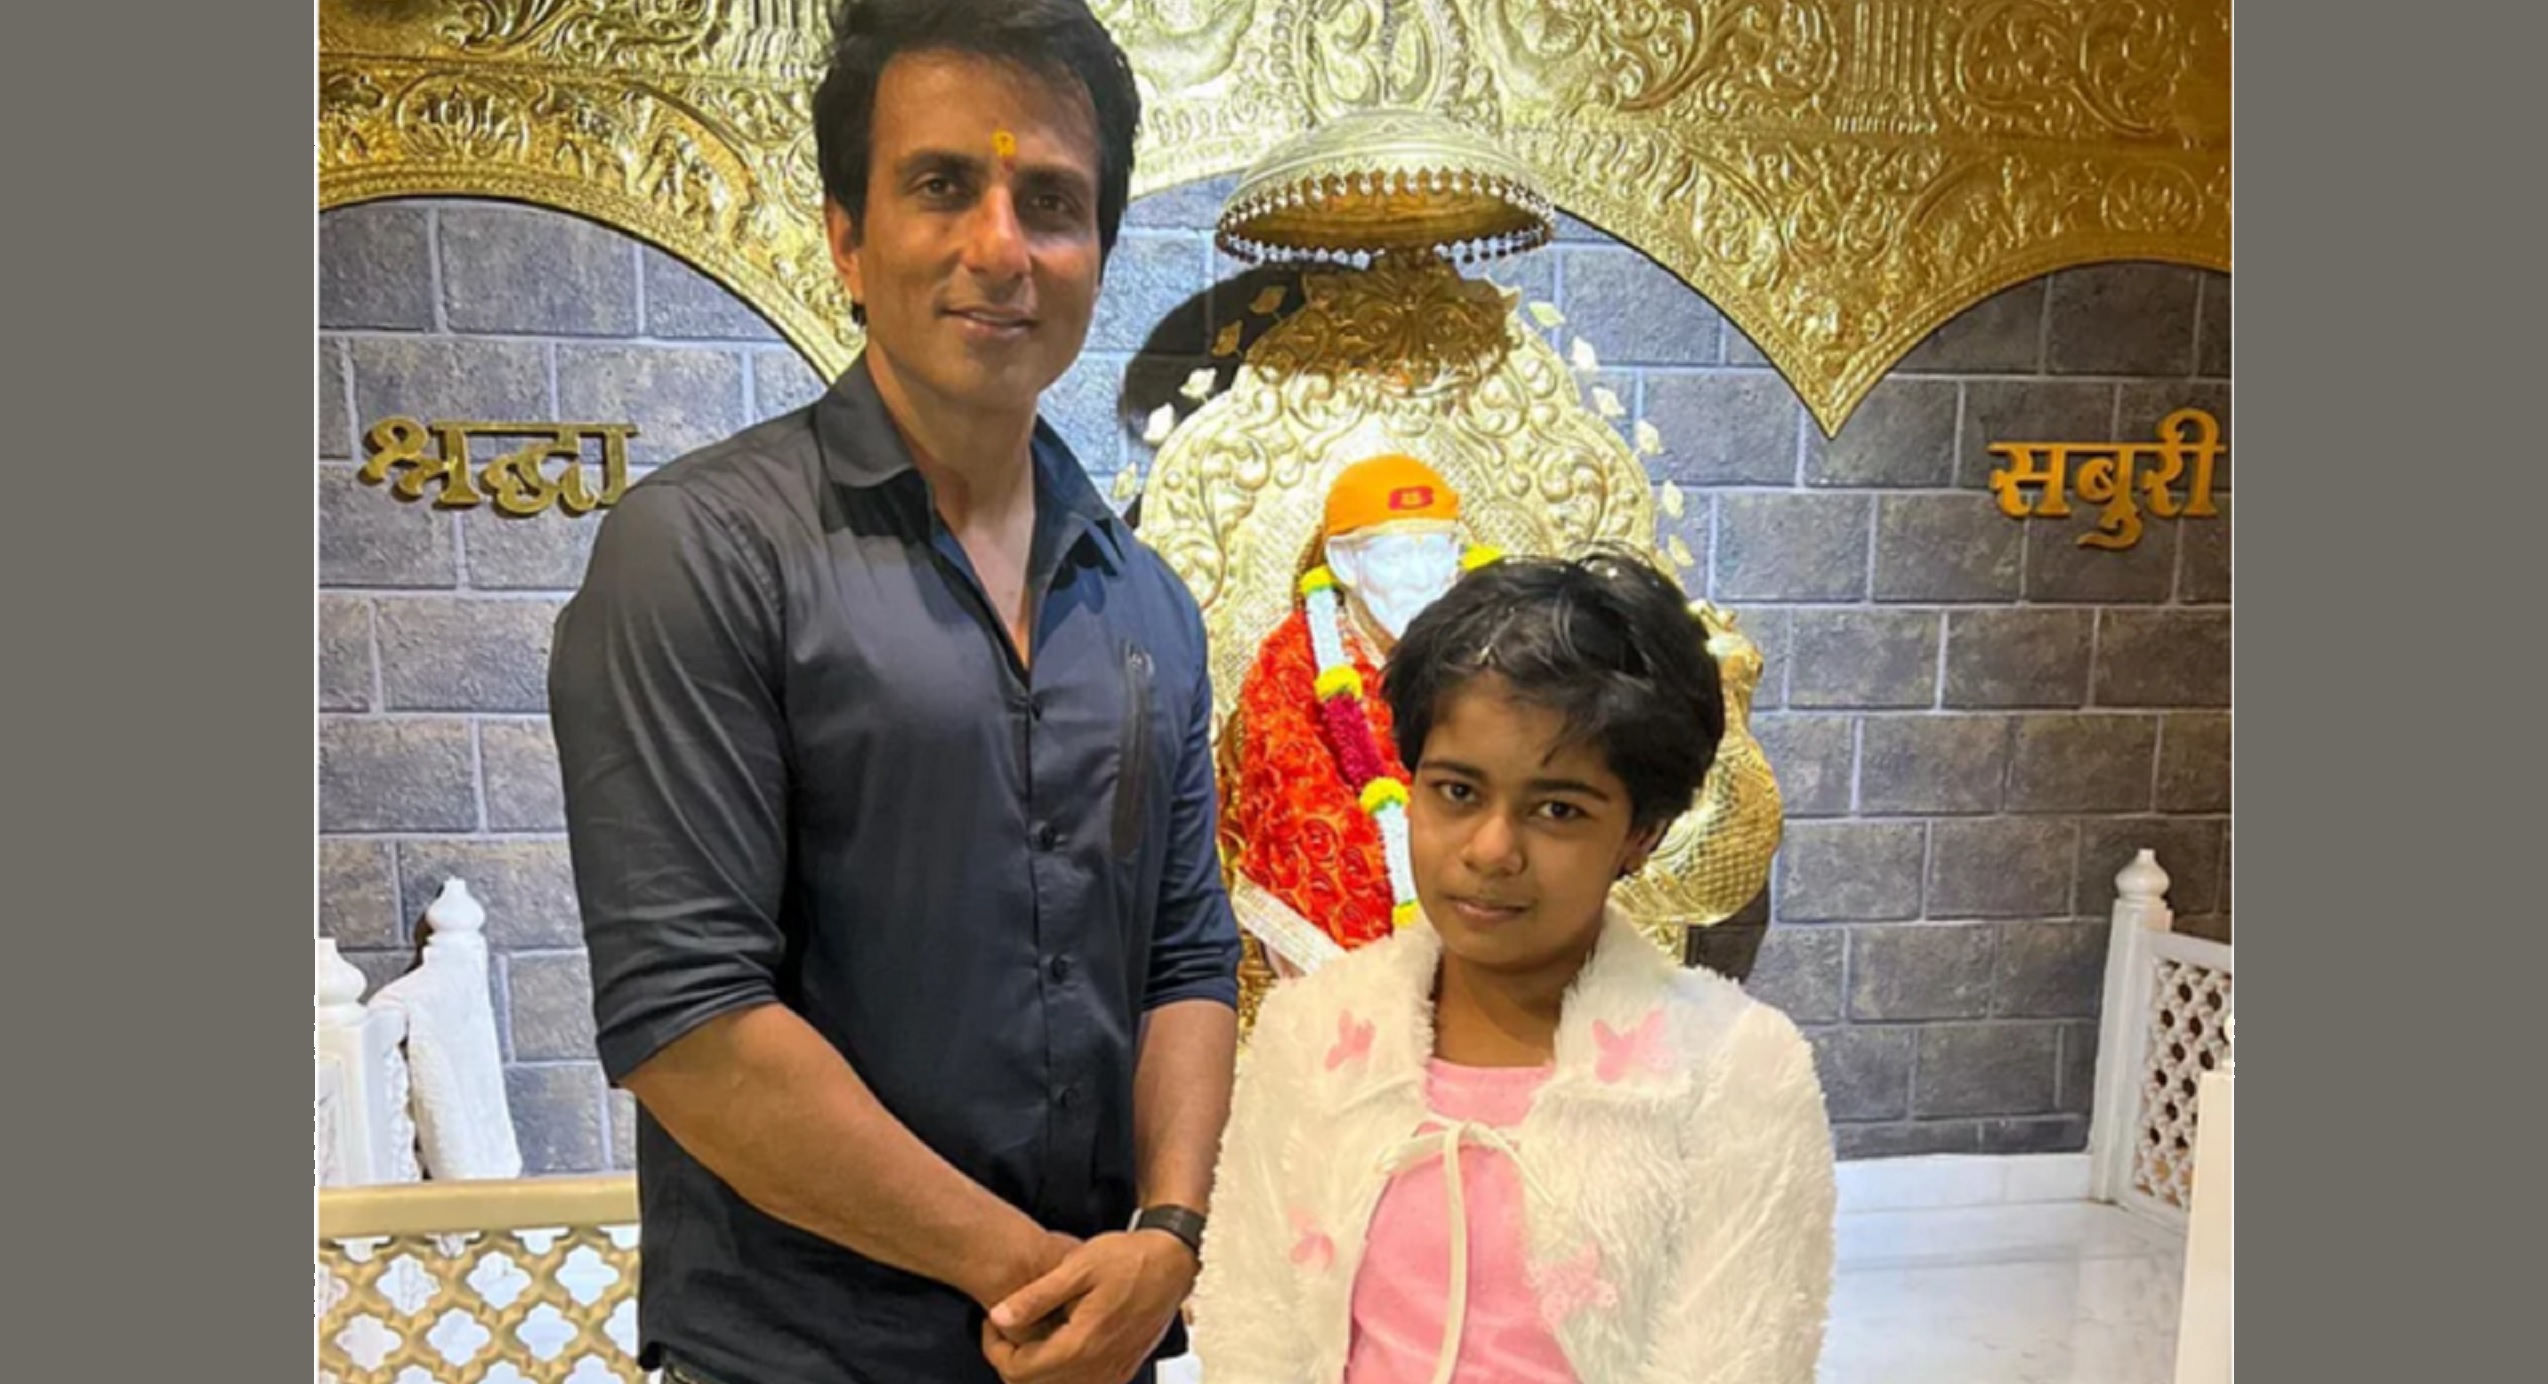 11 Year Old Girl Can Now Walk Because Of Surgery Aided By Sonu Sood, Actor Meets The Girl After Life-Changing Operation